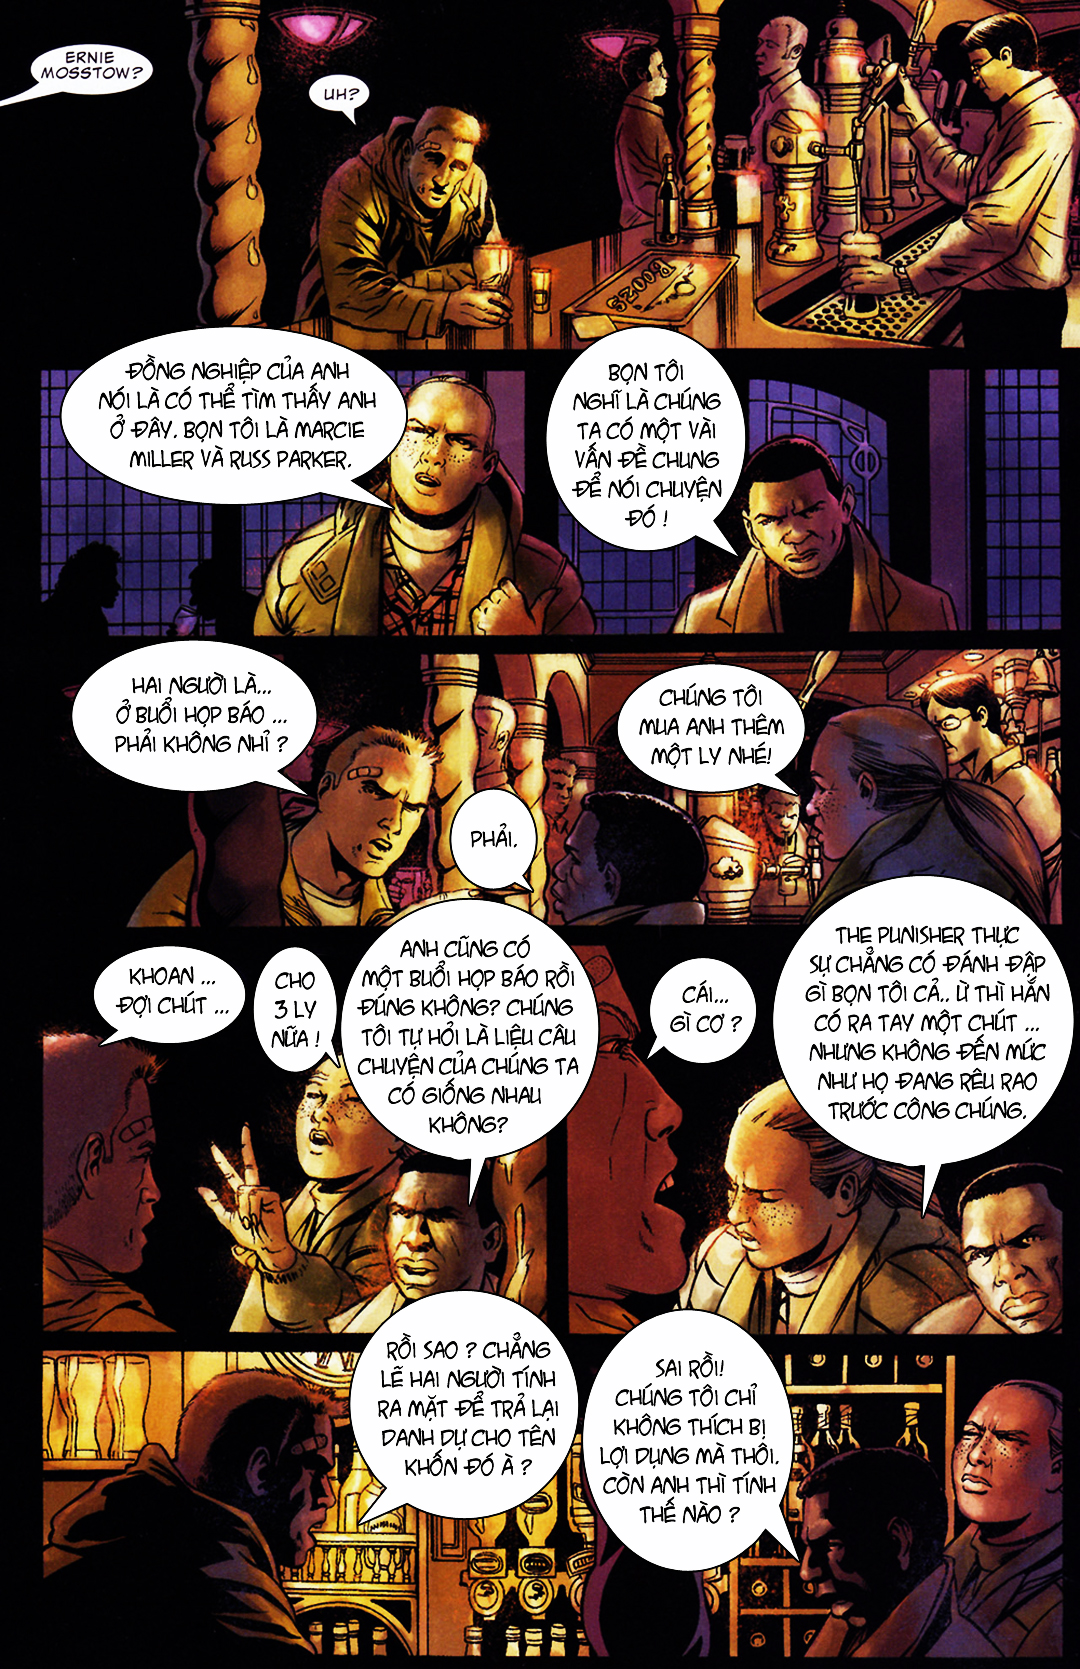 The Punisher: The Slavers chap 3 trang 7